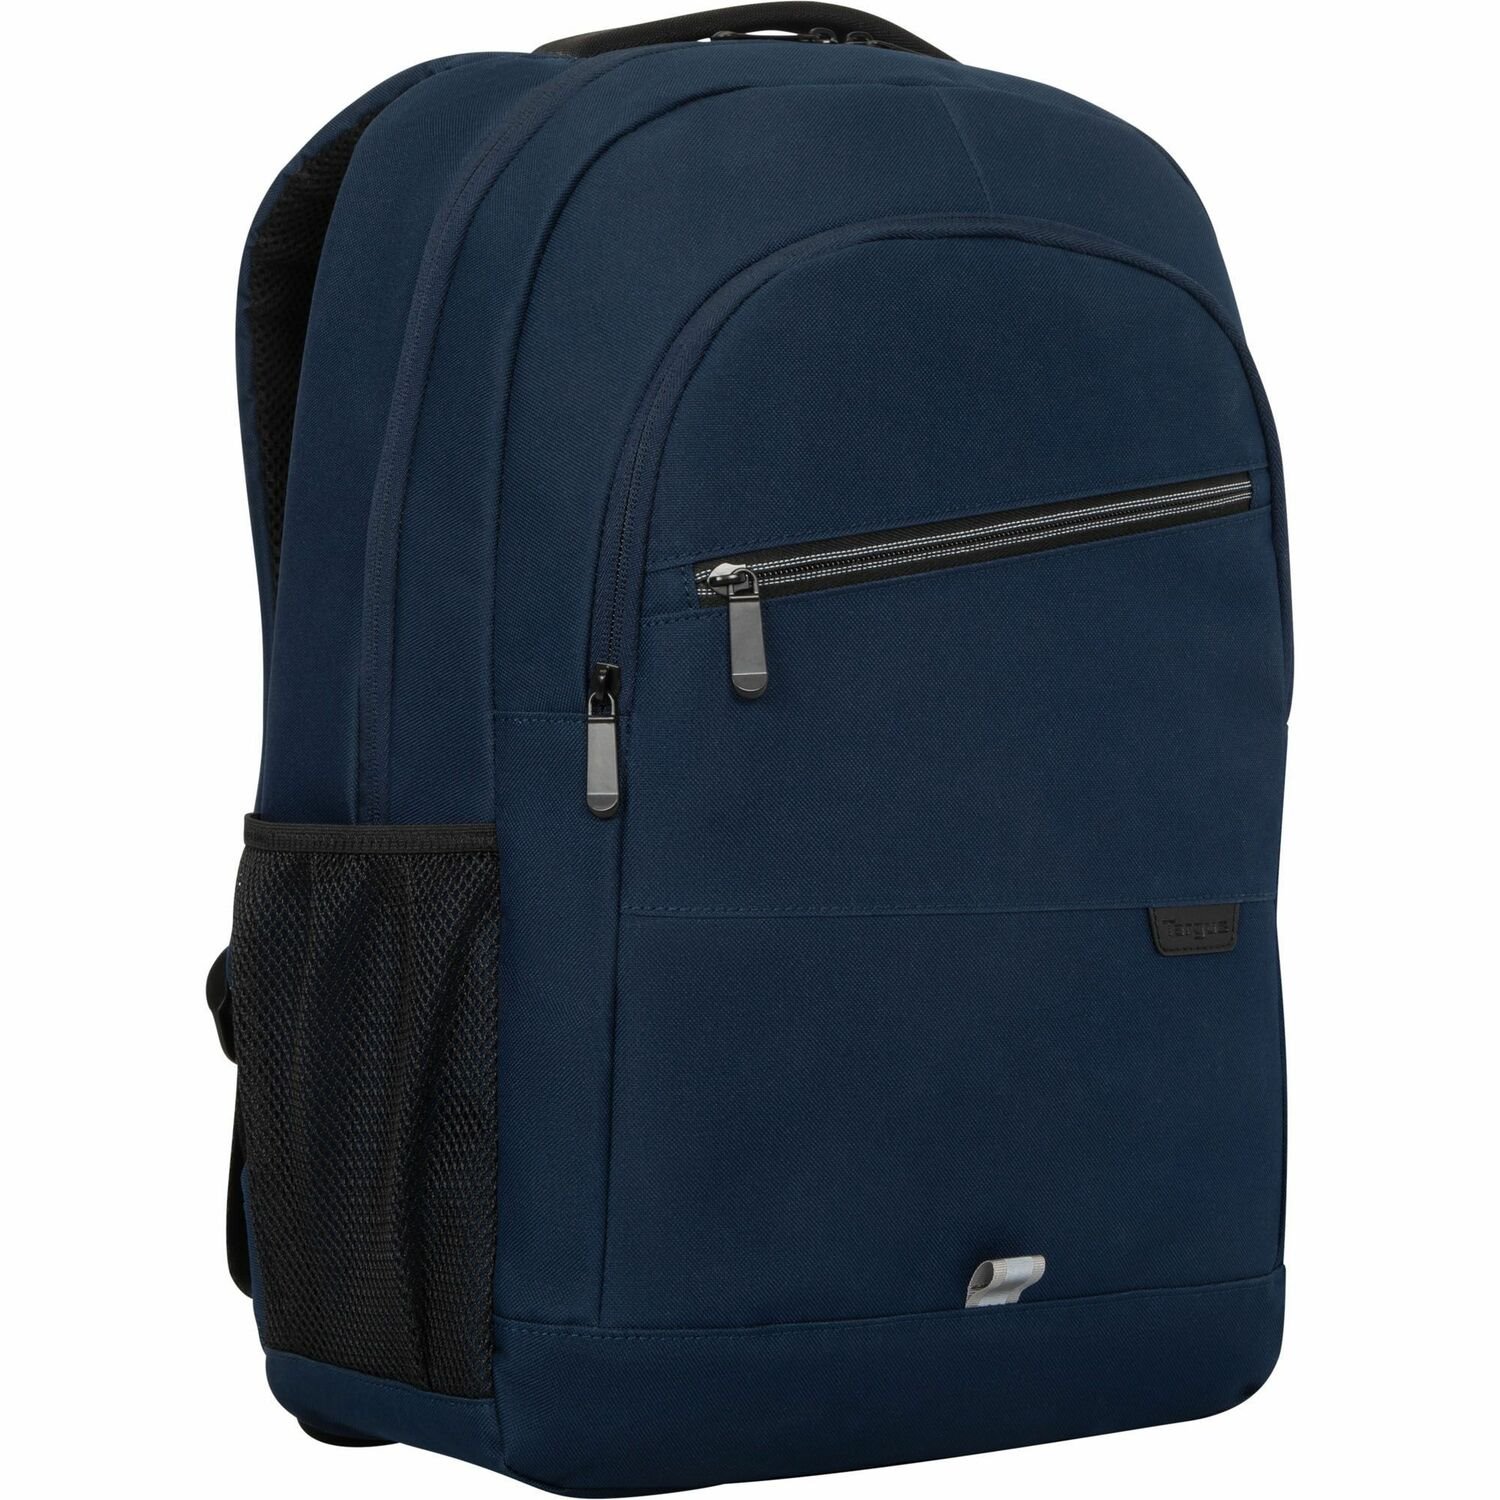 Targus SLATE TBB94602WM Carrying Case (Backpack) for 15" to 16" Notebook, Water Bottle, Charger, Pen - Blue